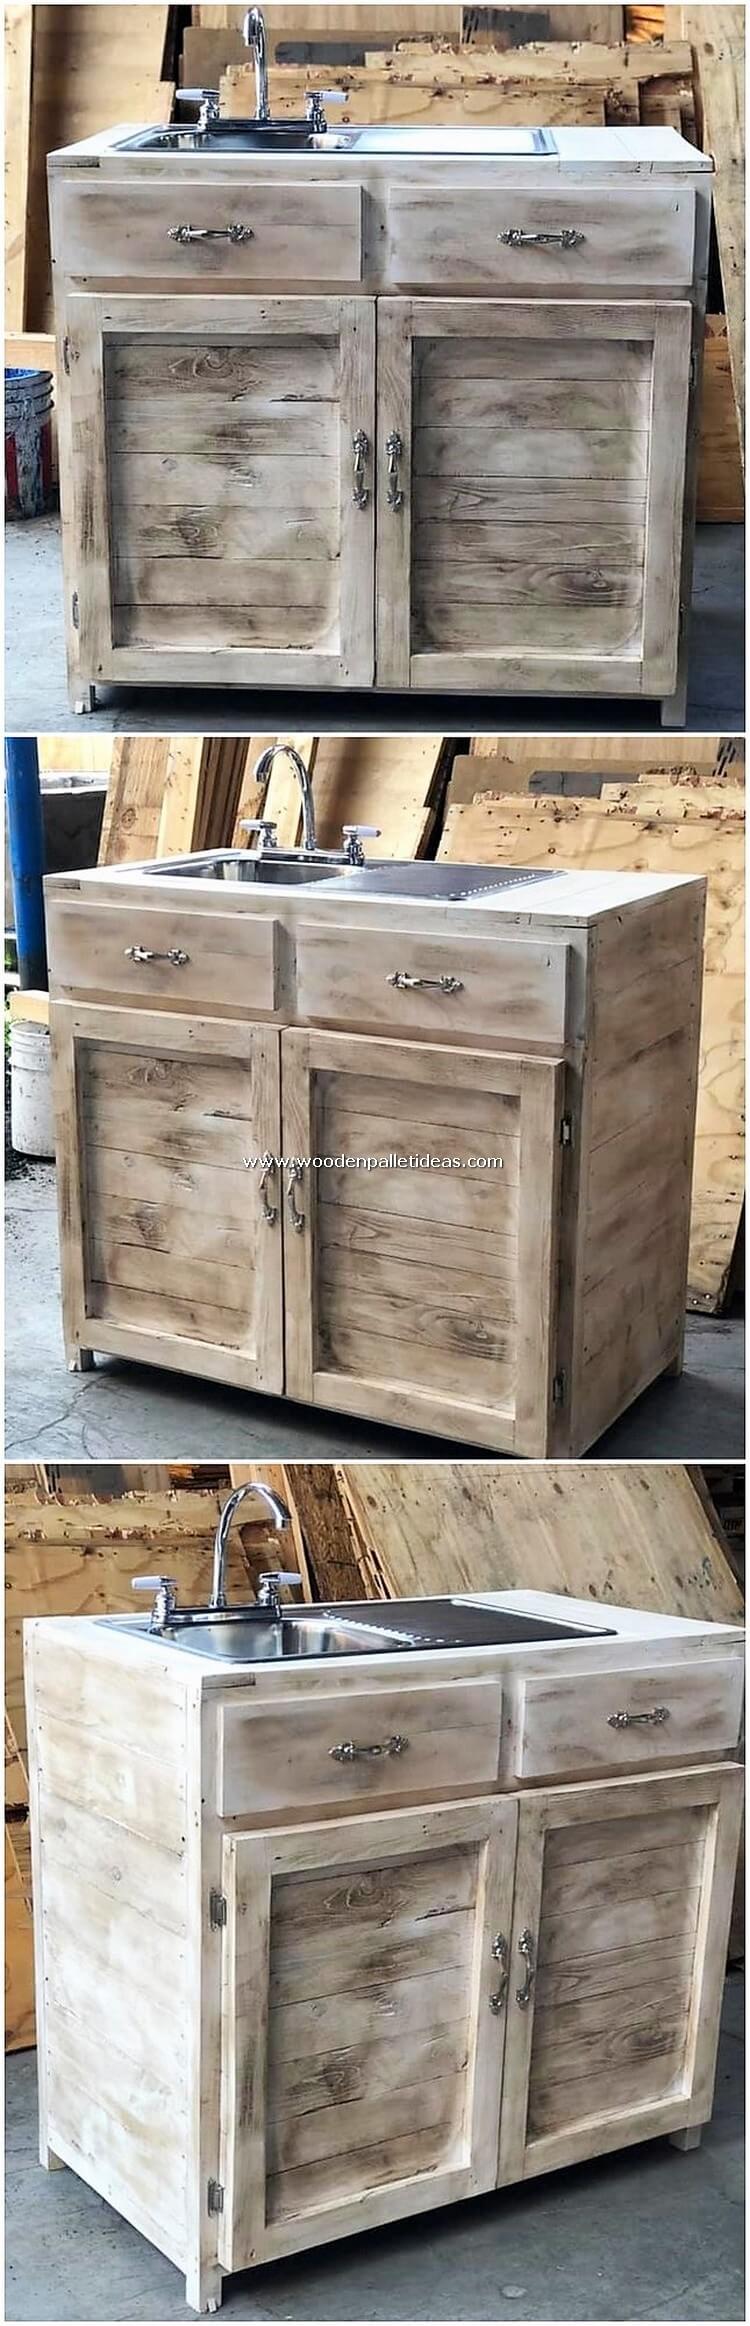 Pallet-Sink-with-Cabinet